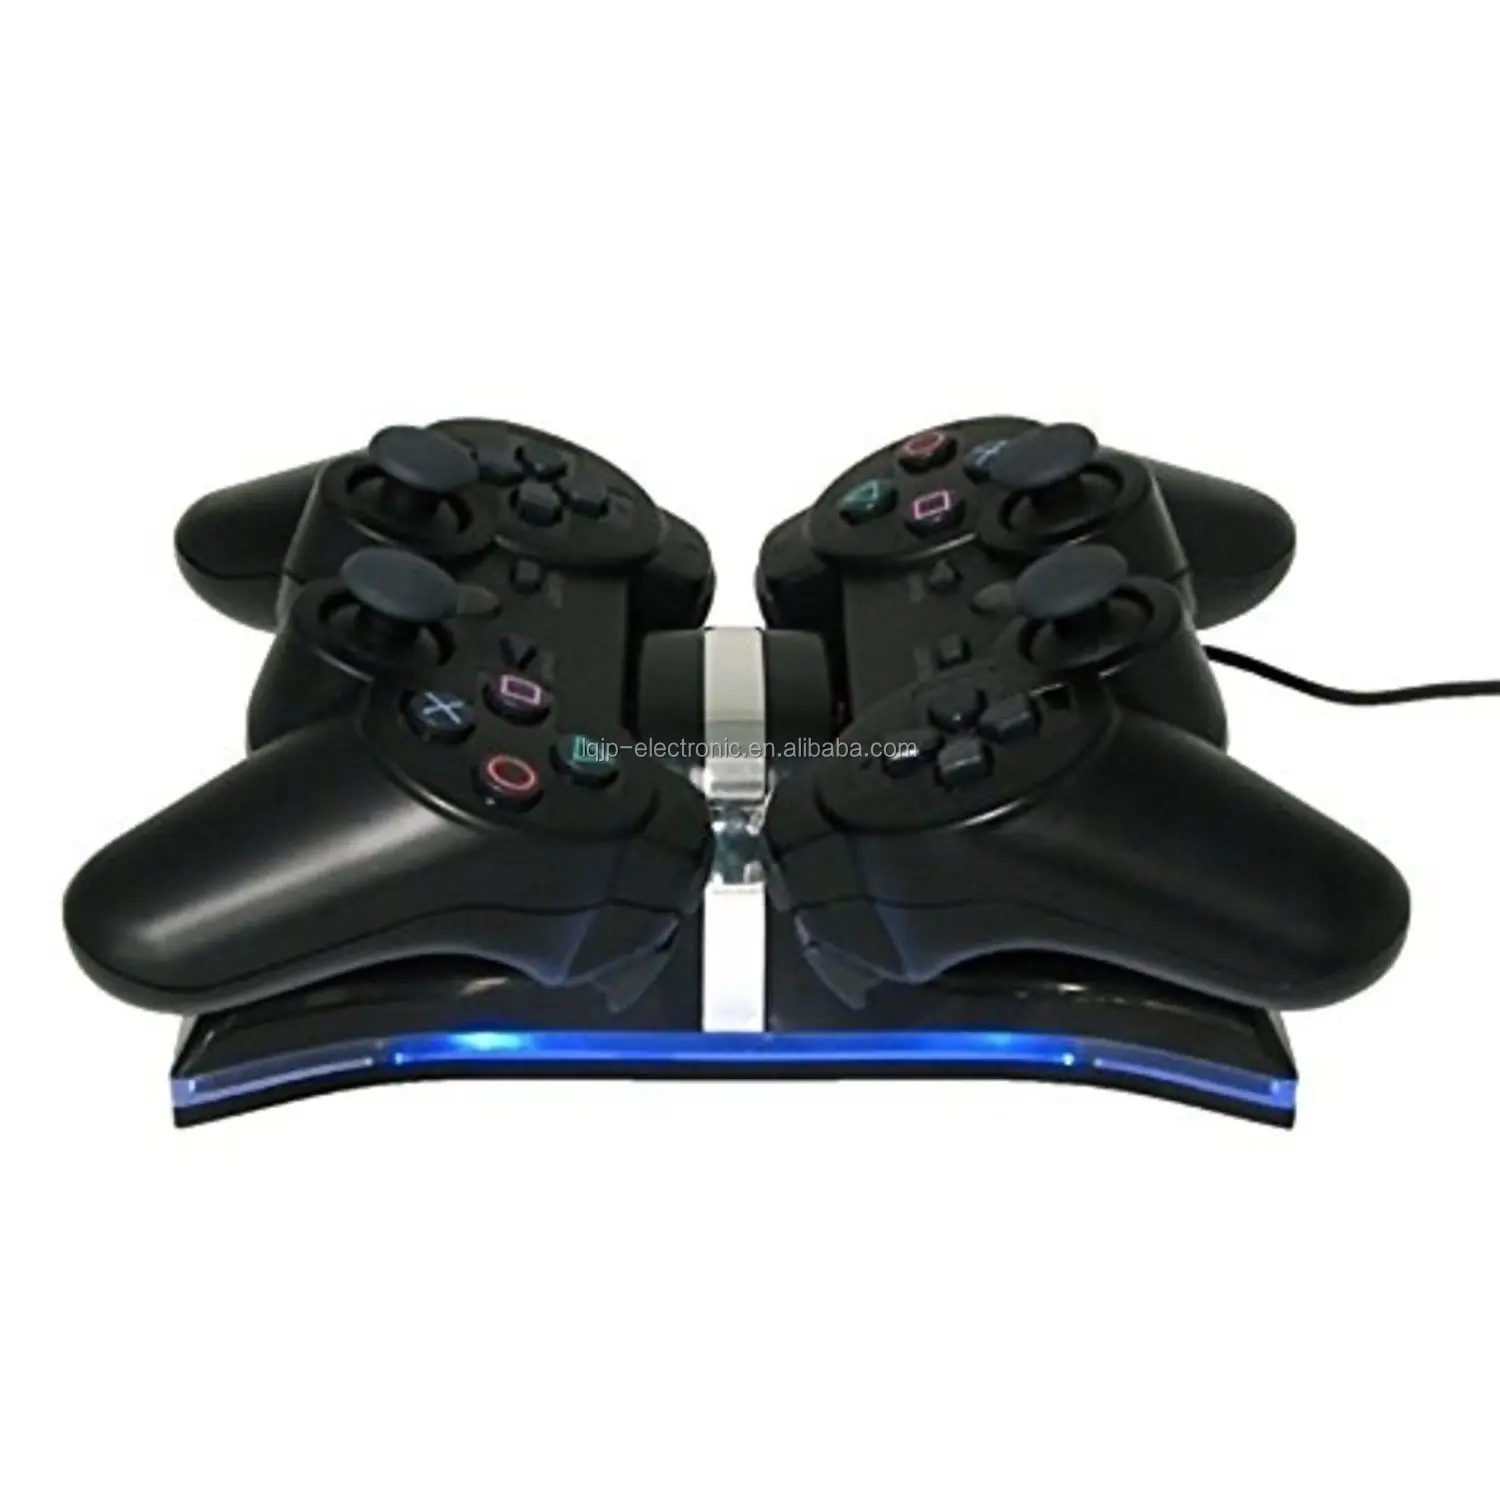 ps3 controller charging stand